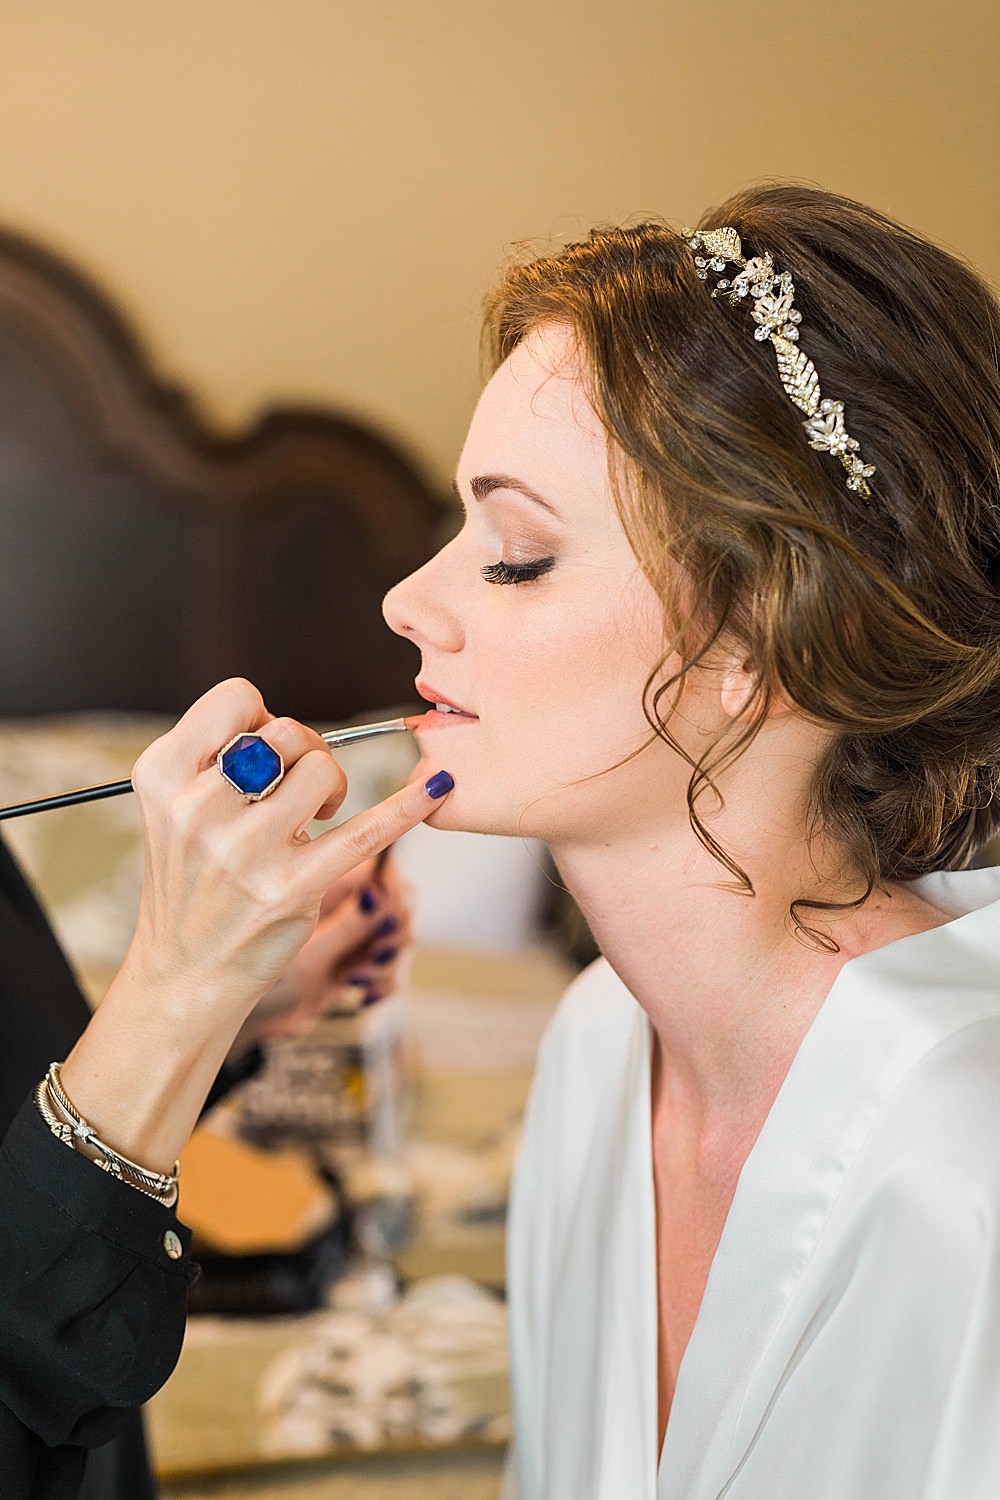 Makeup Artist applies bride's lipstick while getting ready for her wedding